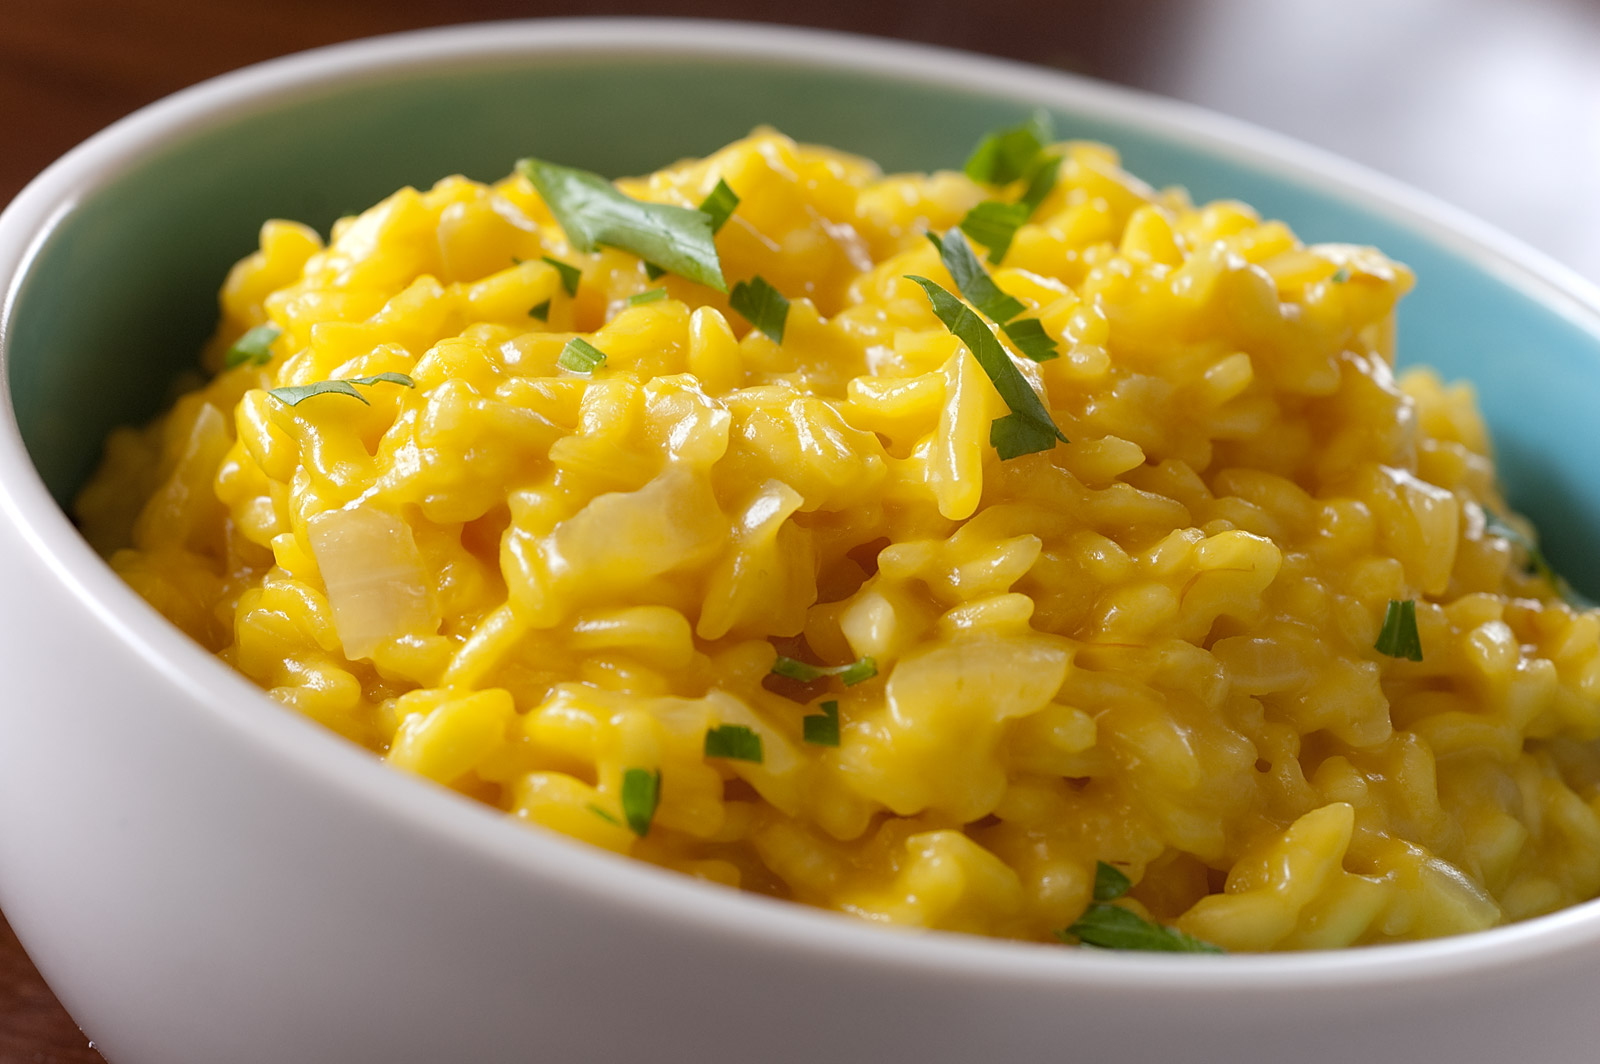 Eat Risotto …in Italy #TastyTuesday